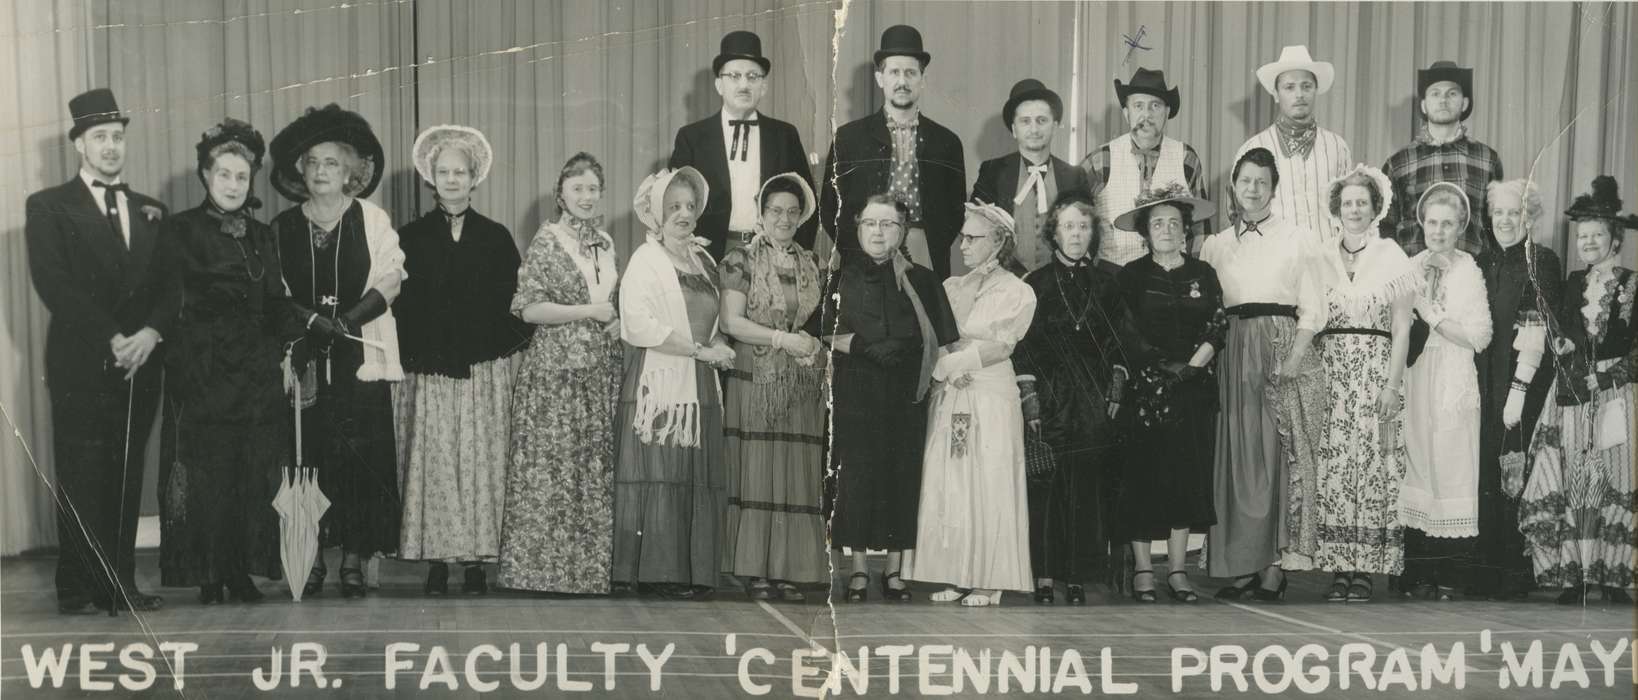 Portraits - Group, Entertainment, cowboy hat, stage, Rossiter, Lynn, Iowa History, performance, history of Iowa, play, Schools and Education, Sioux City, IA, Iowa, umbrella